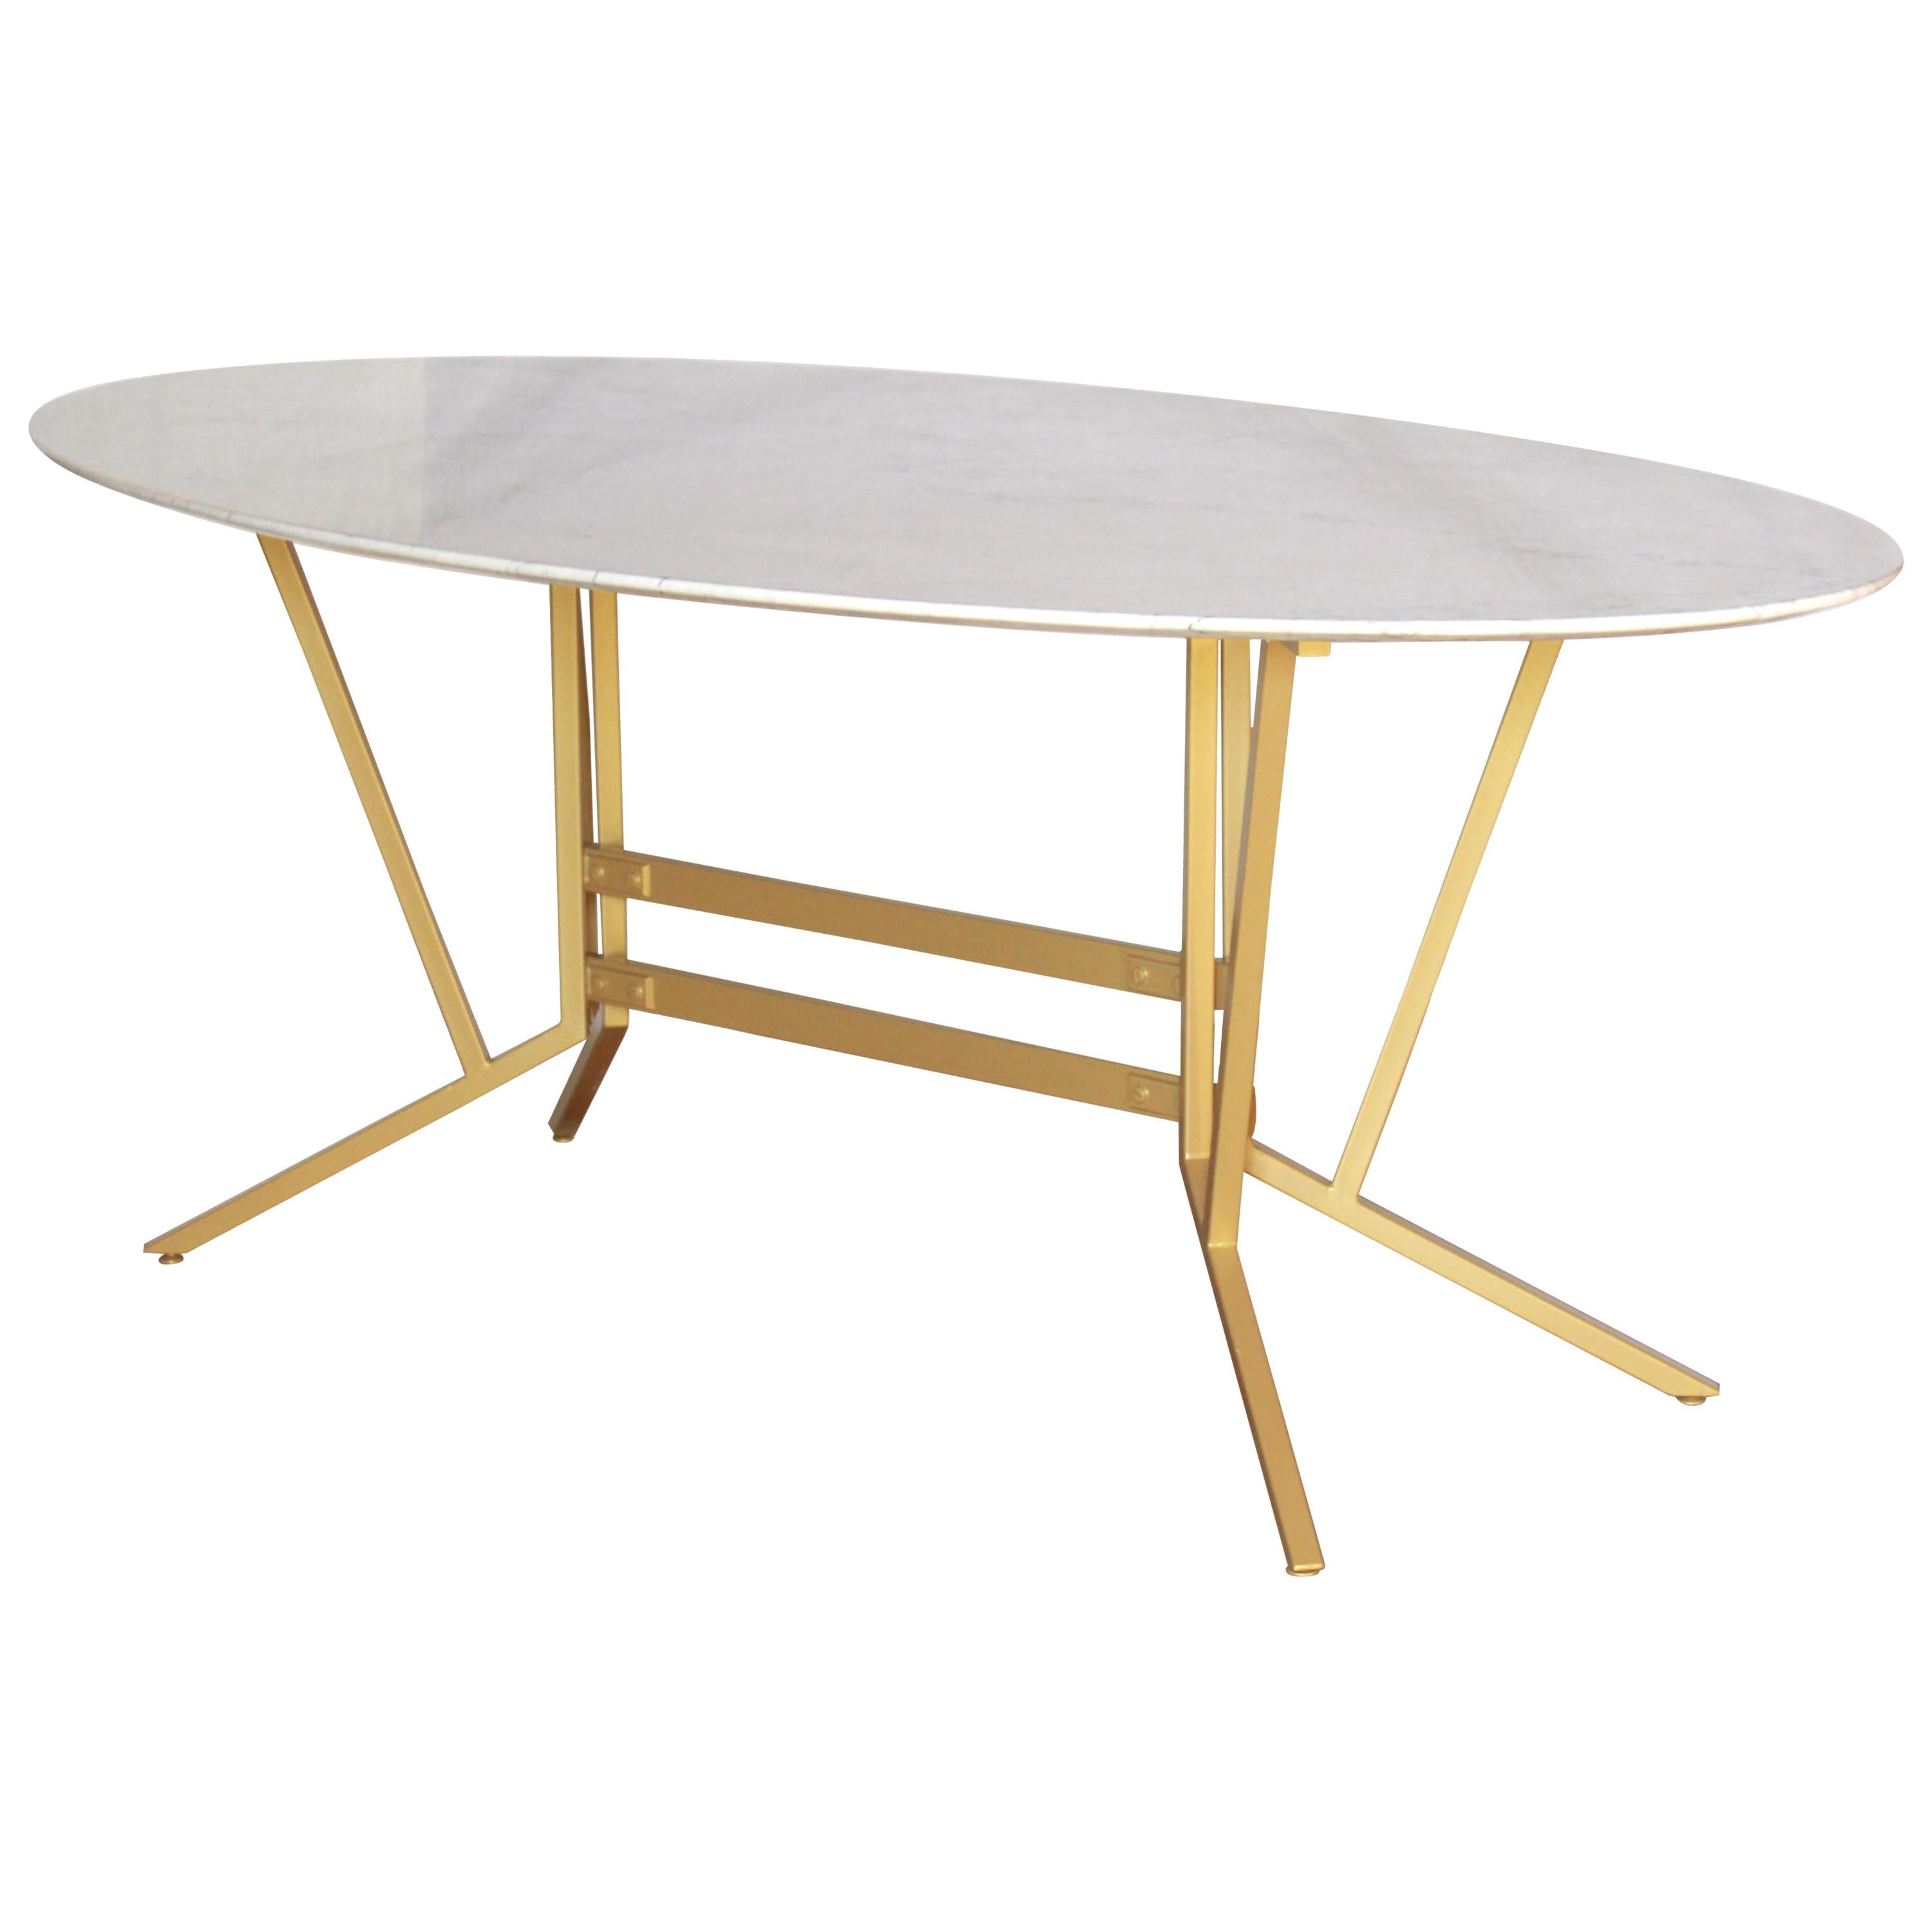 1960s Vintage Oval Carrara Marble Dining Table for Six People